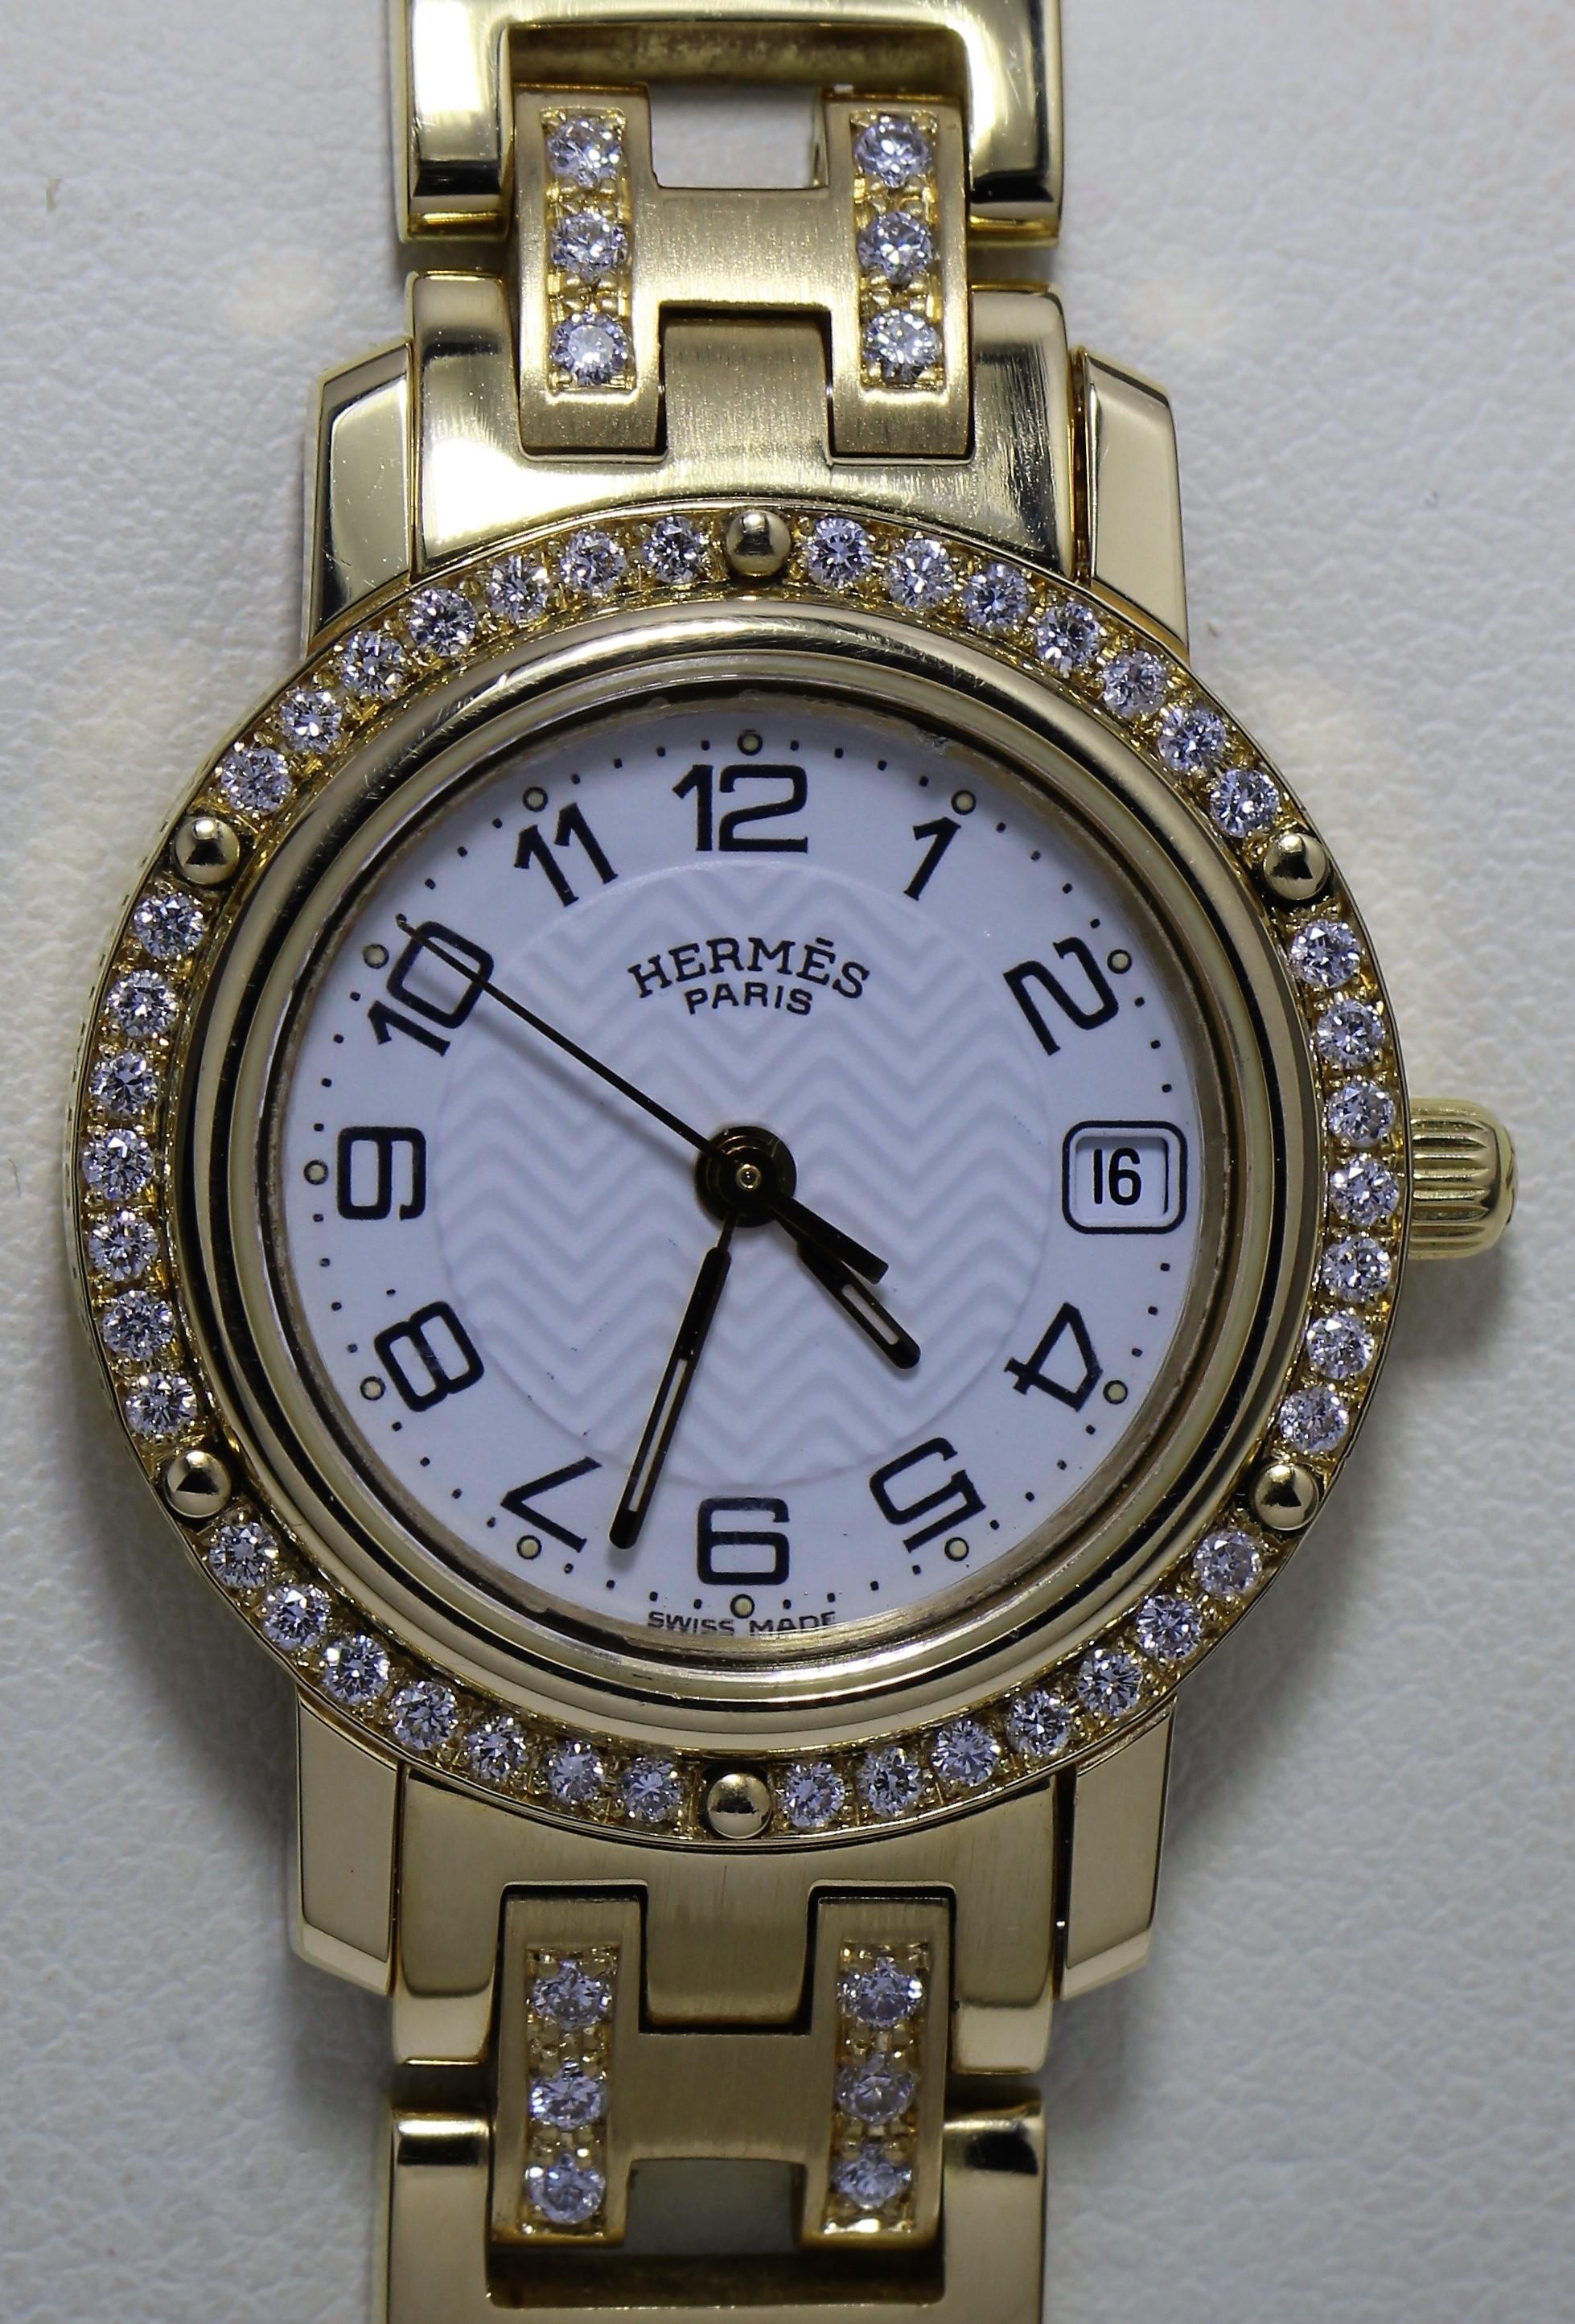 Hermes 18k Gold Watch with Diamond Studded Bezel and Belt

Roman numeral face with date
Belt is studded with diamonds in H pattern (54 diamonds) and bezel is studded with 42 diamonds